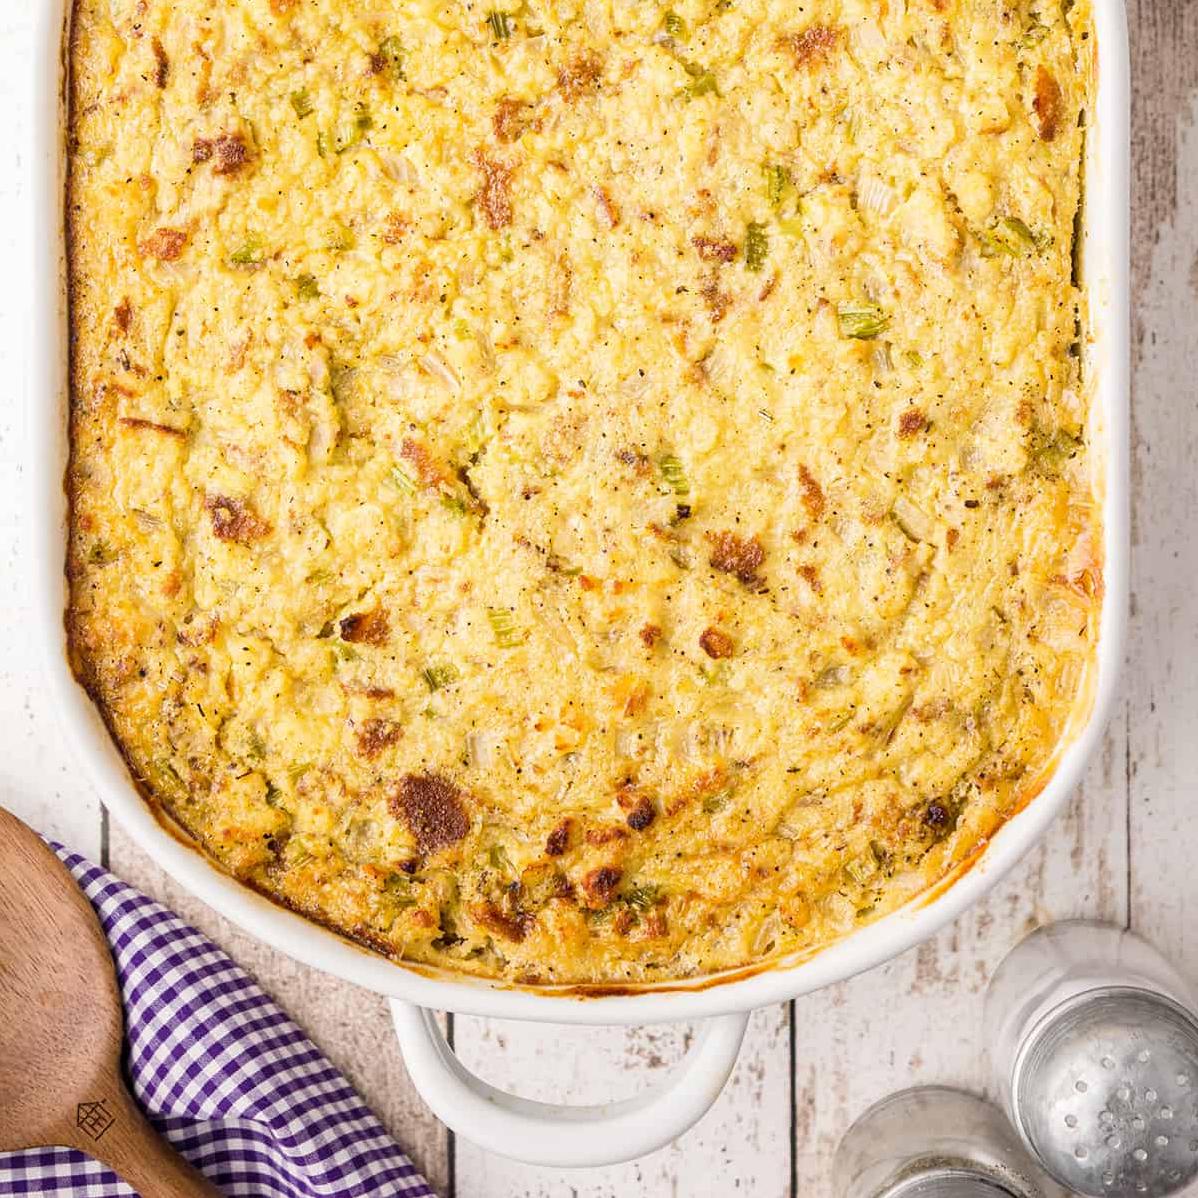  Bring some southern charm to your table with our classic cornbread dressing recipe.